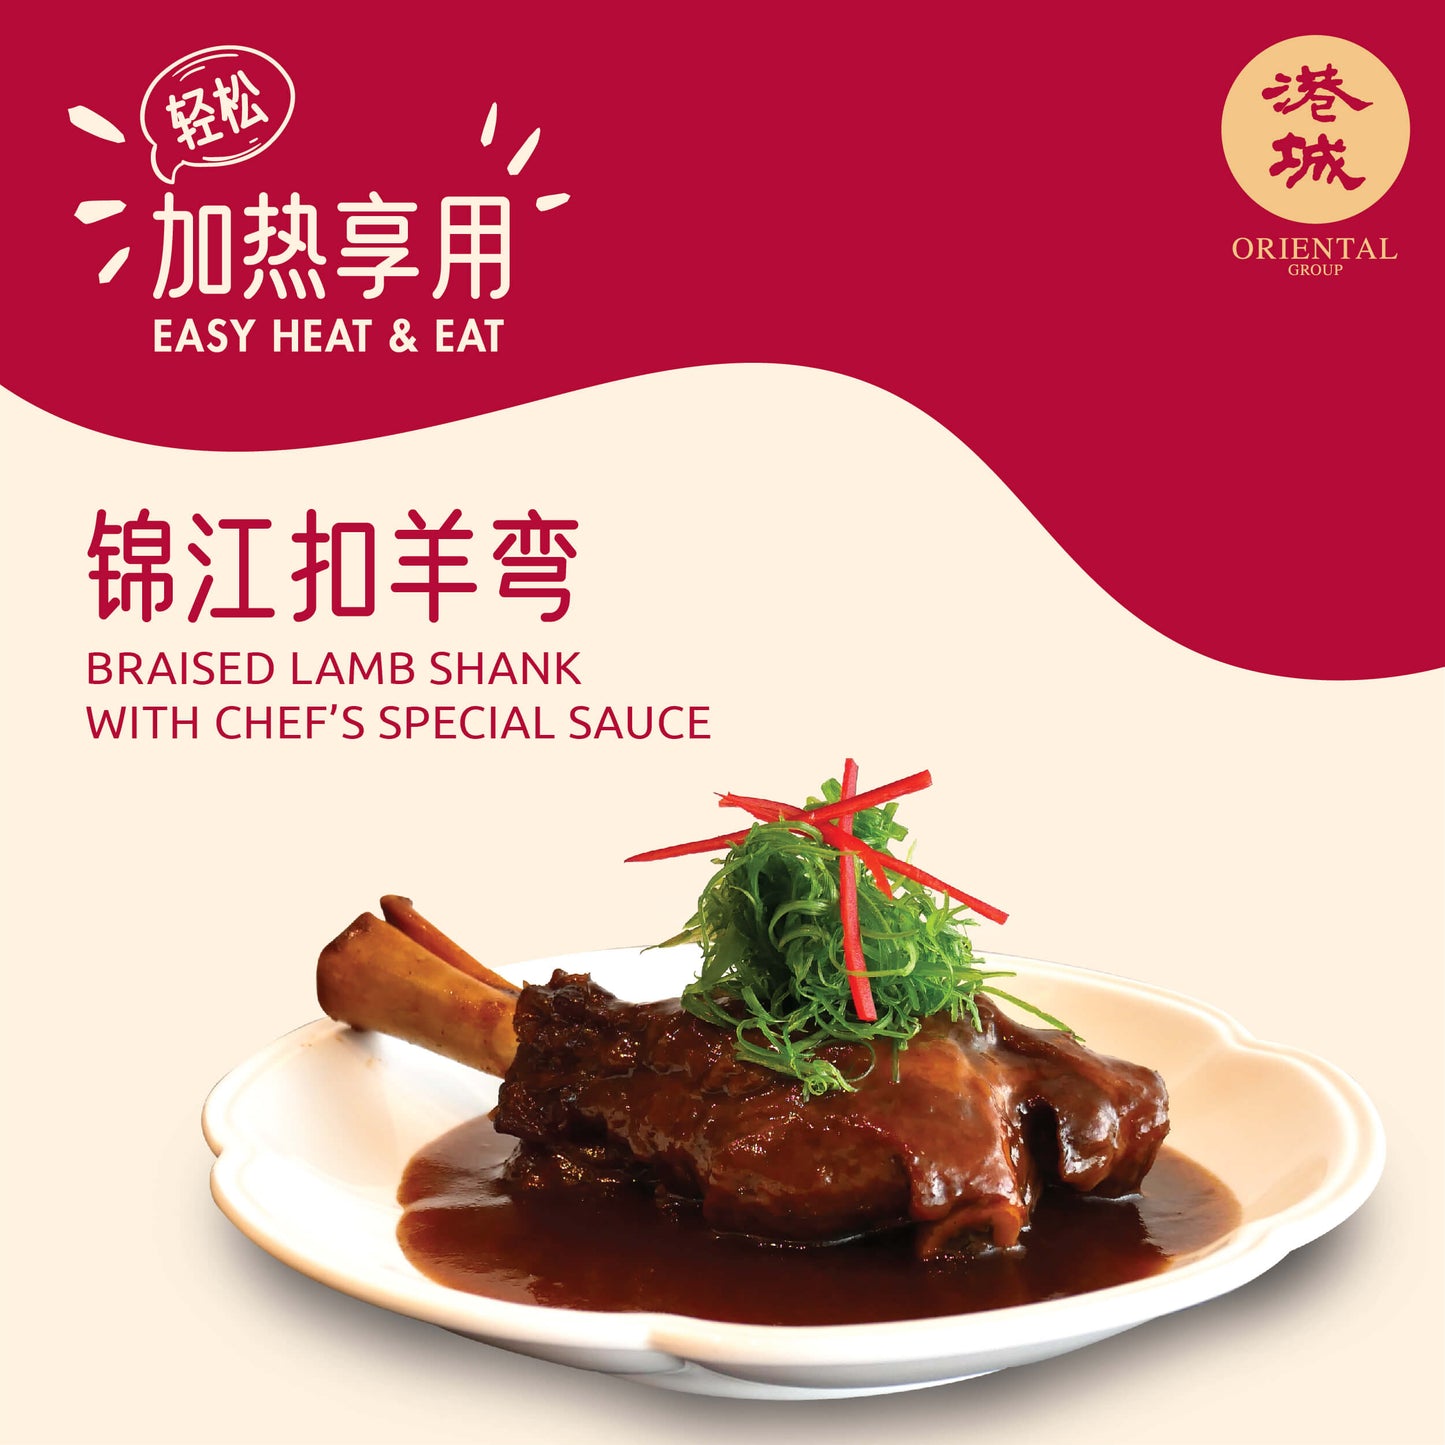 Braised Lamb Shank with Chef’s Special Sauce 700g